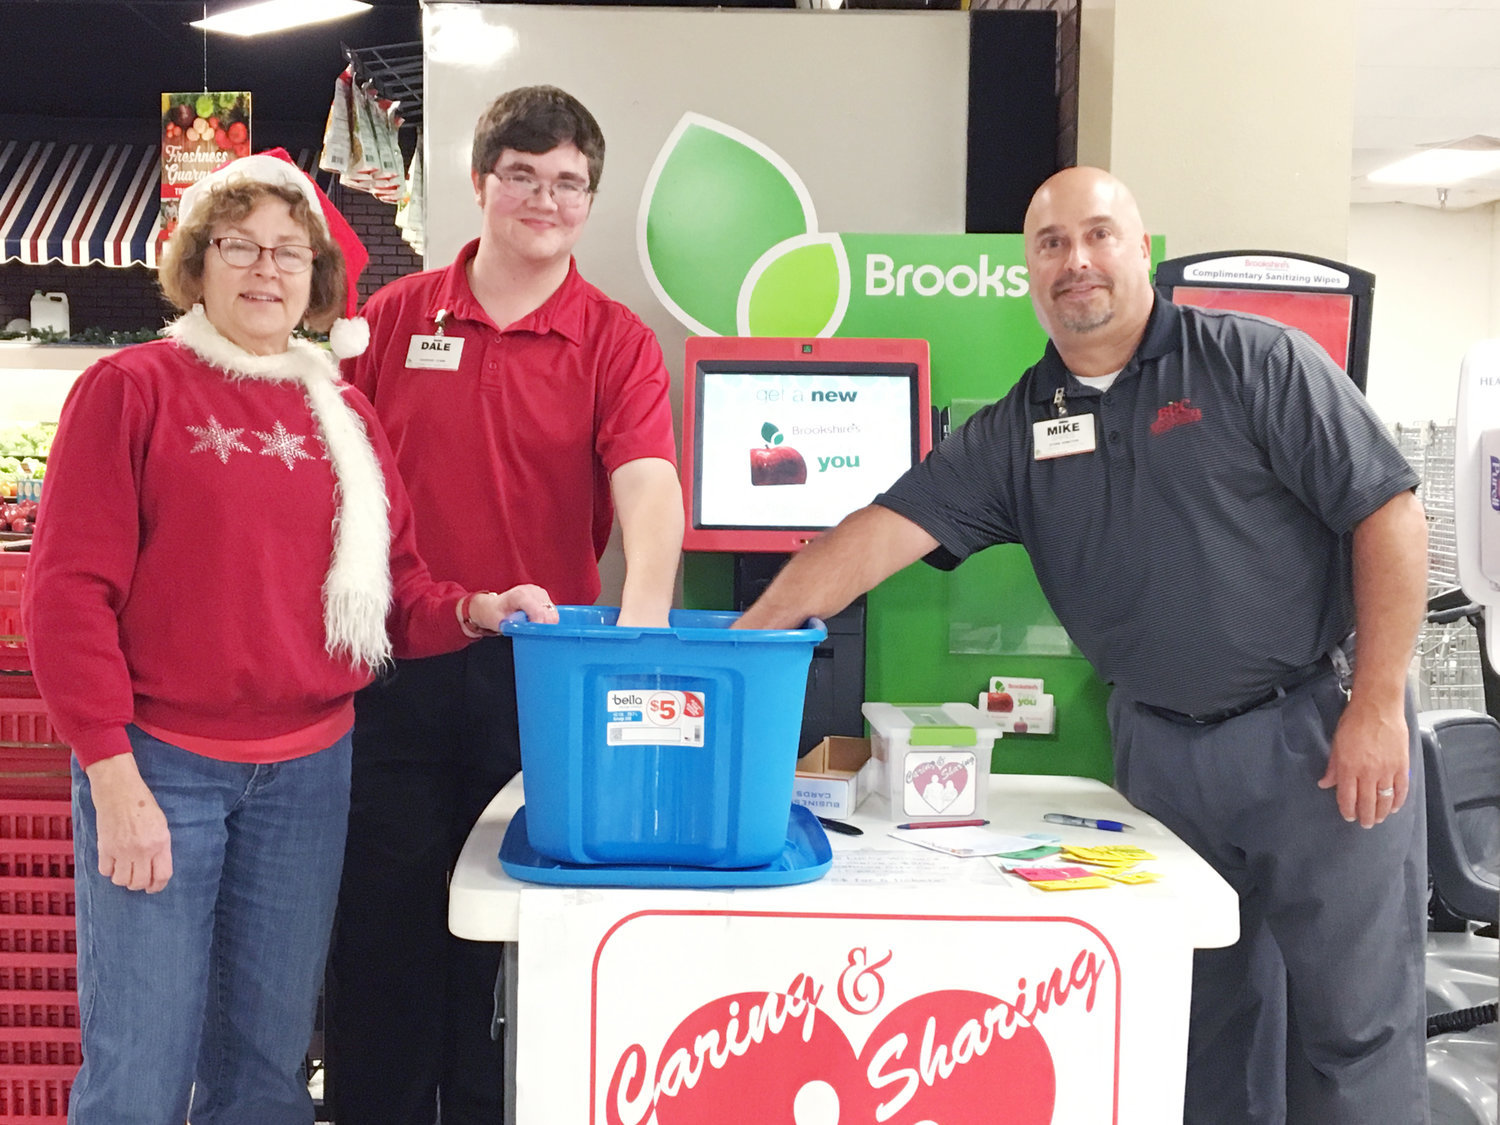 Caring & Sharing raffle coordinator Pam Palmer and Brookshire’s courtesy clerk Dale Greene are pictured with Brookshire’s store manager Mike Shires. Shires pulled three lucky winners from thousands of tickets. Each winner will receive a $200 gift card from Brookshire’s.